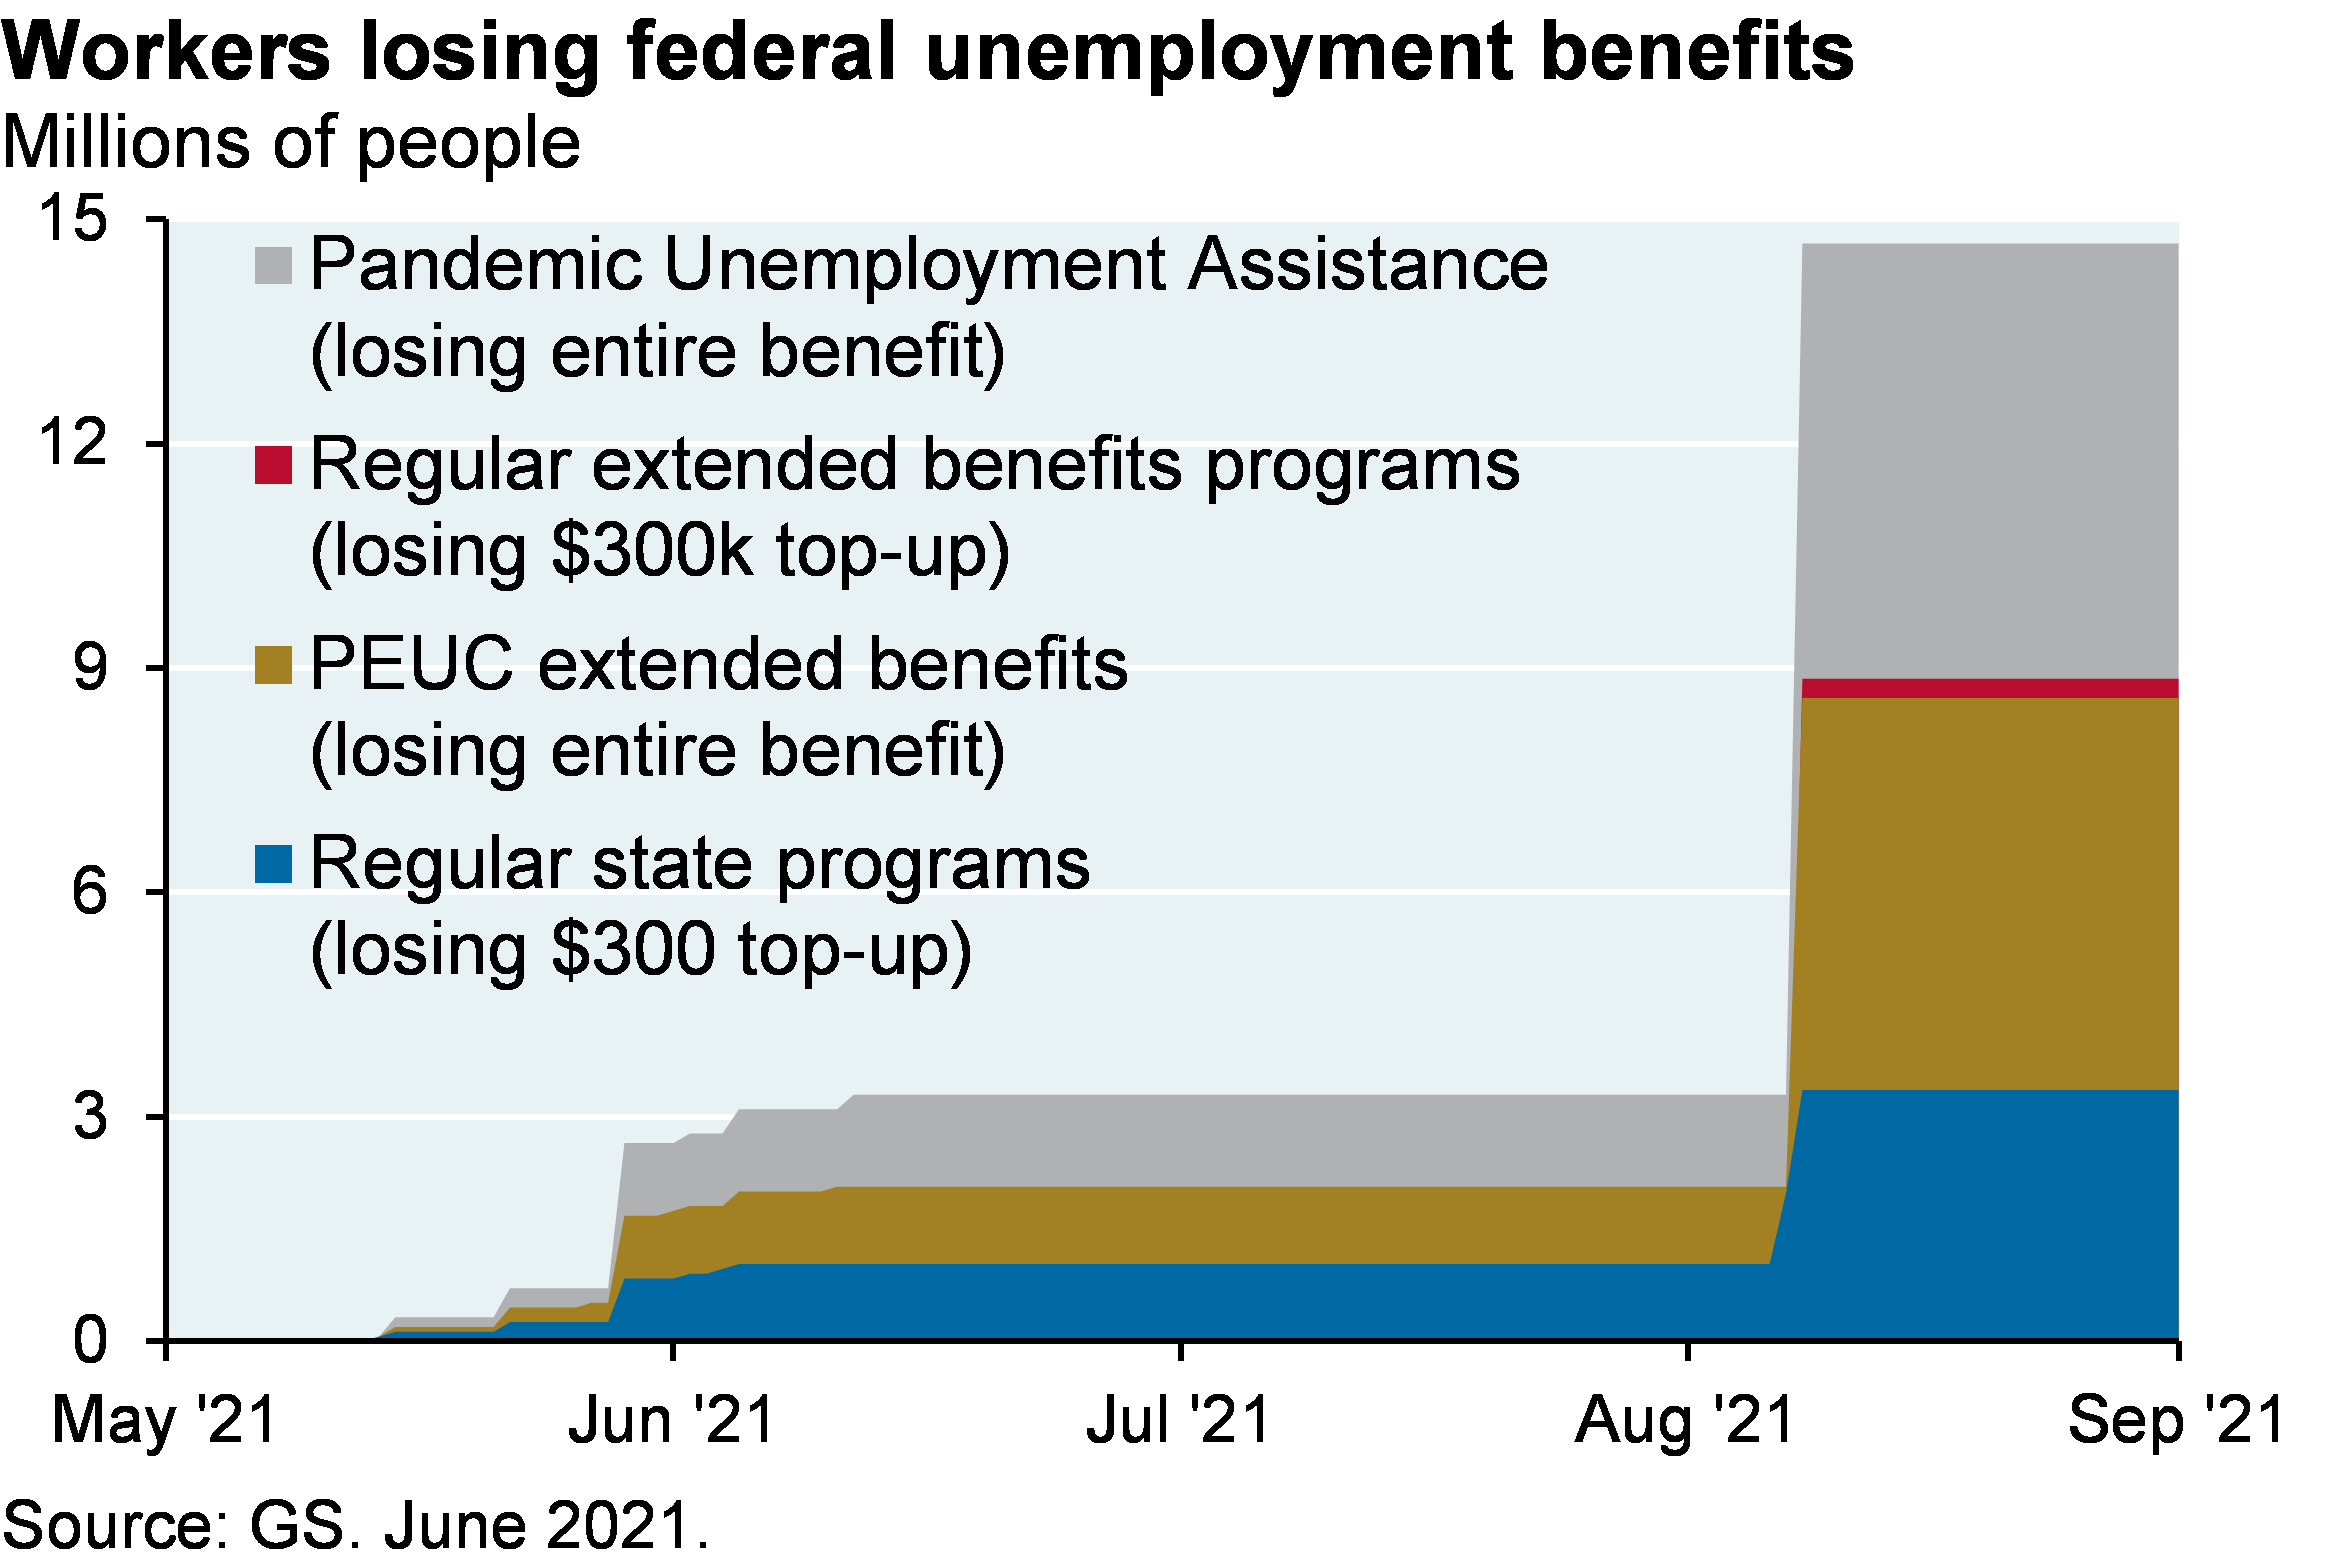 Workers losing federal unemployment benefits